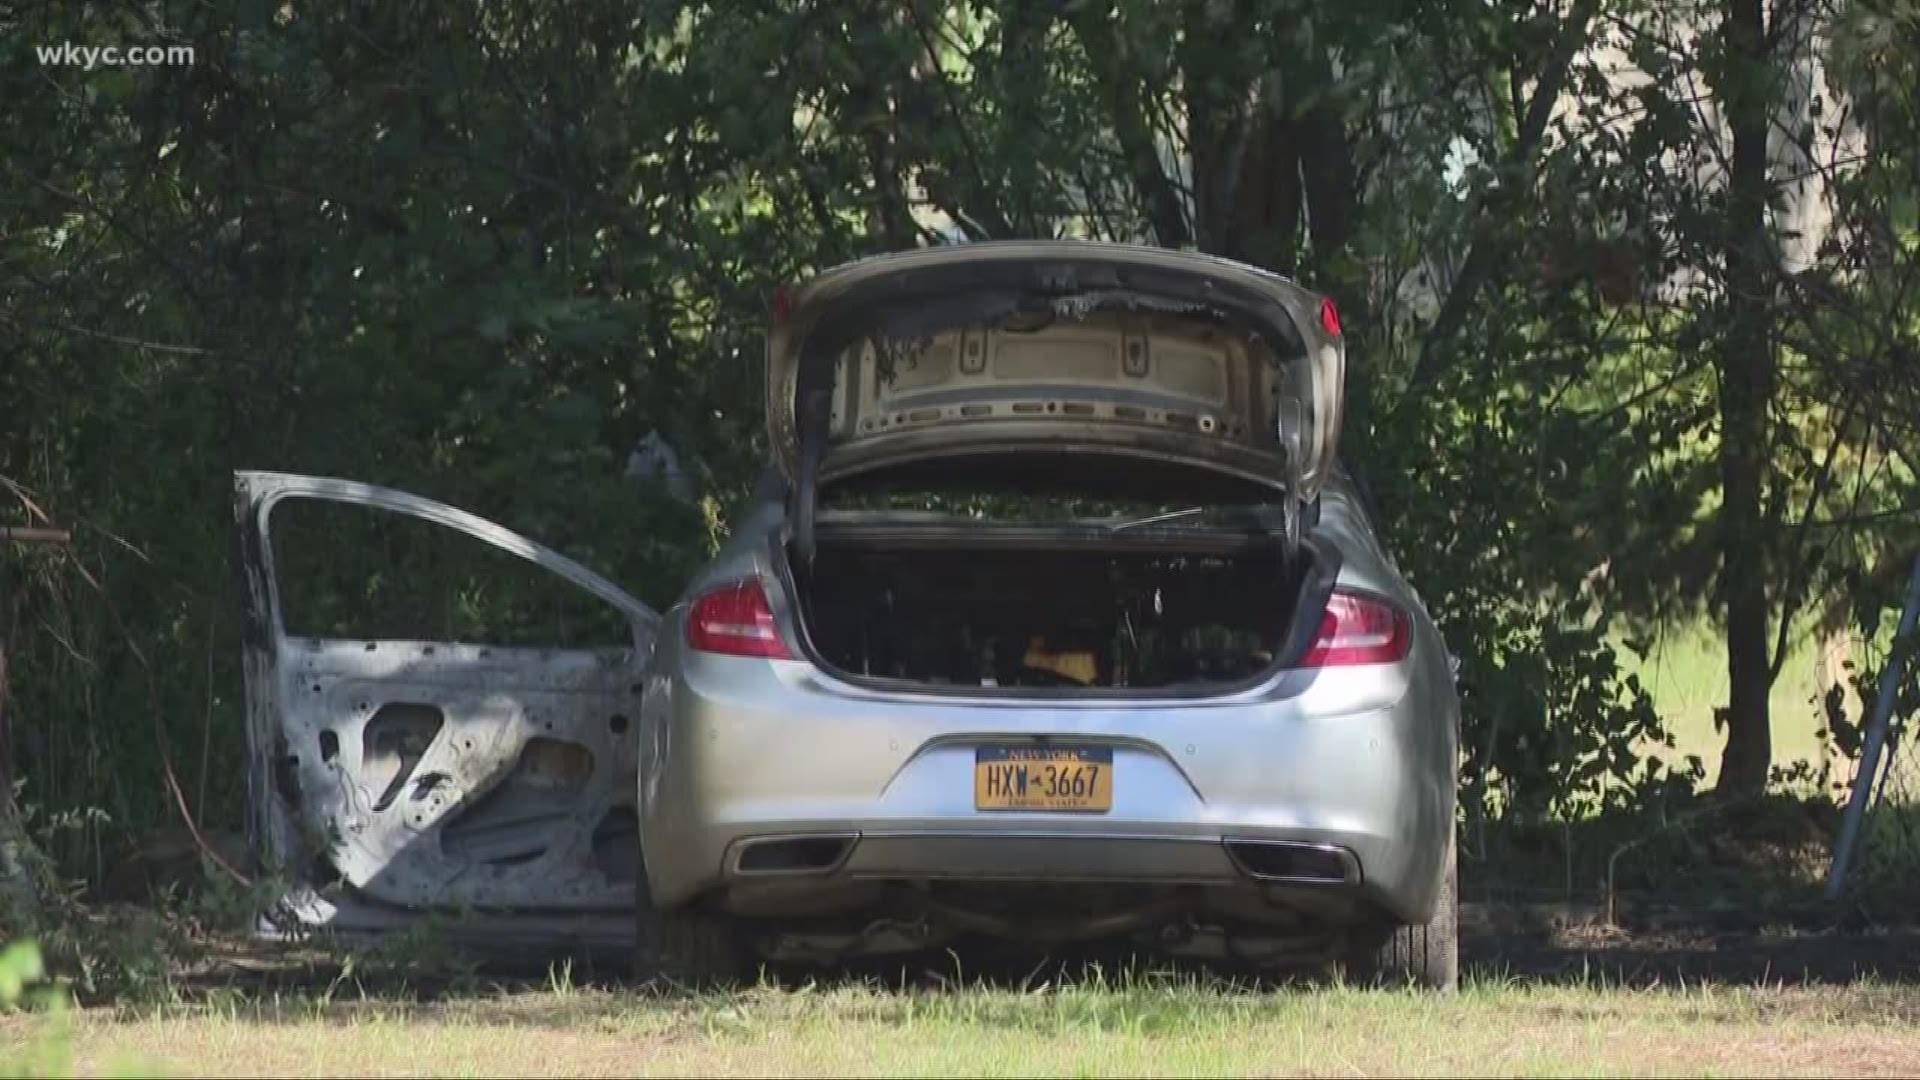 Bodies found burned in car in East Cleveland identified as father & daughter